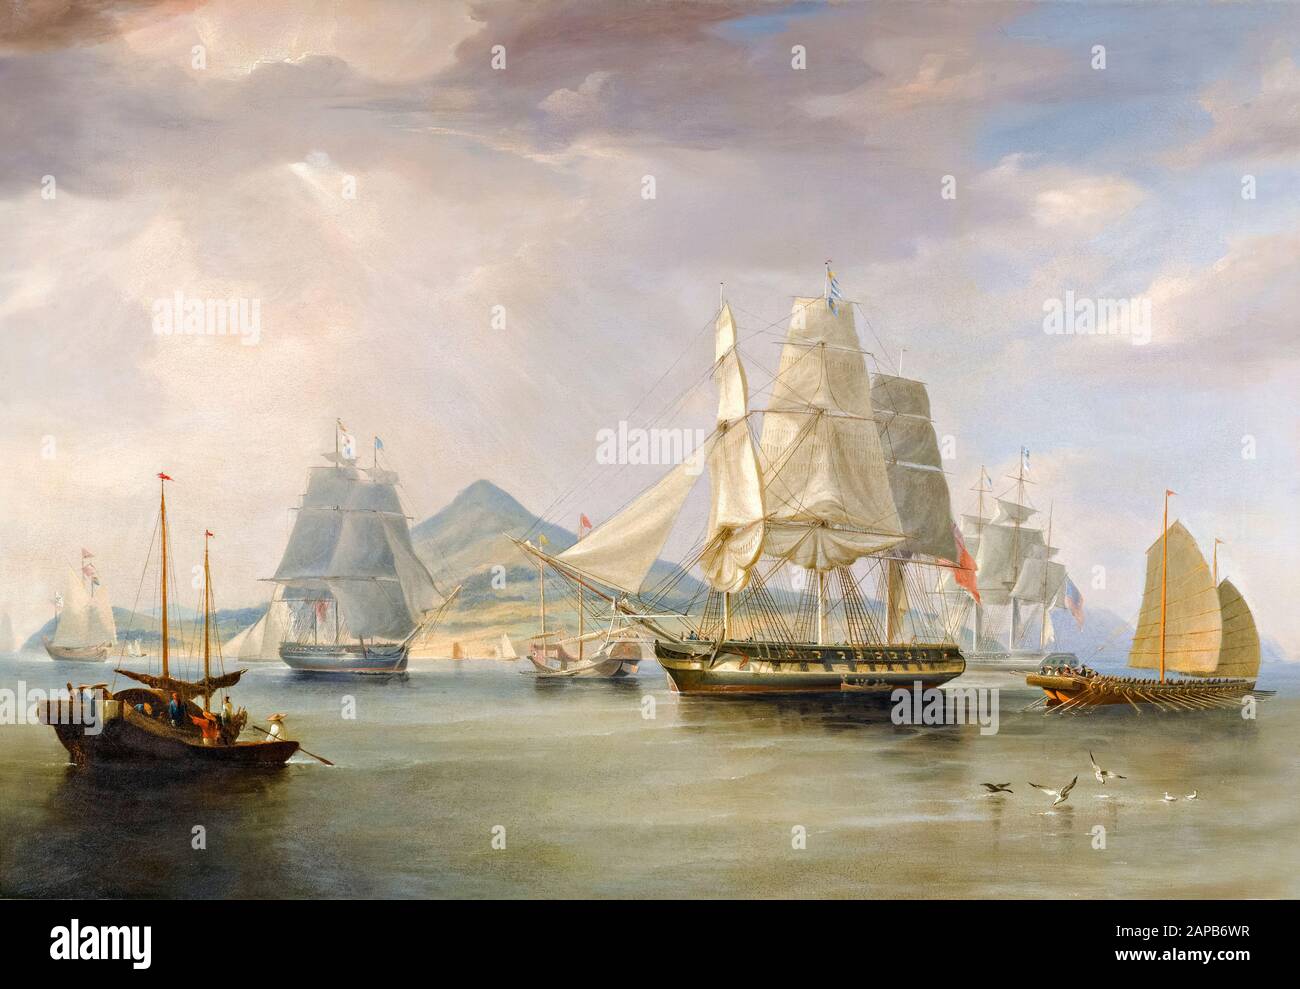 The Opium ships at Lintin, China, 241, painting by William John Huggins, after 241 Stockfoto